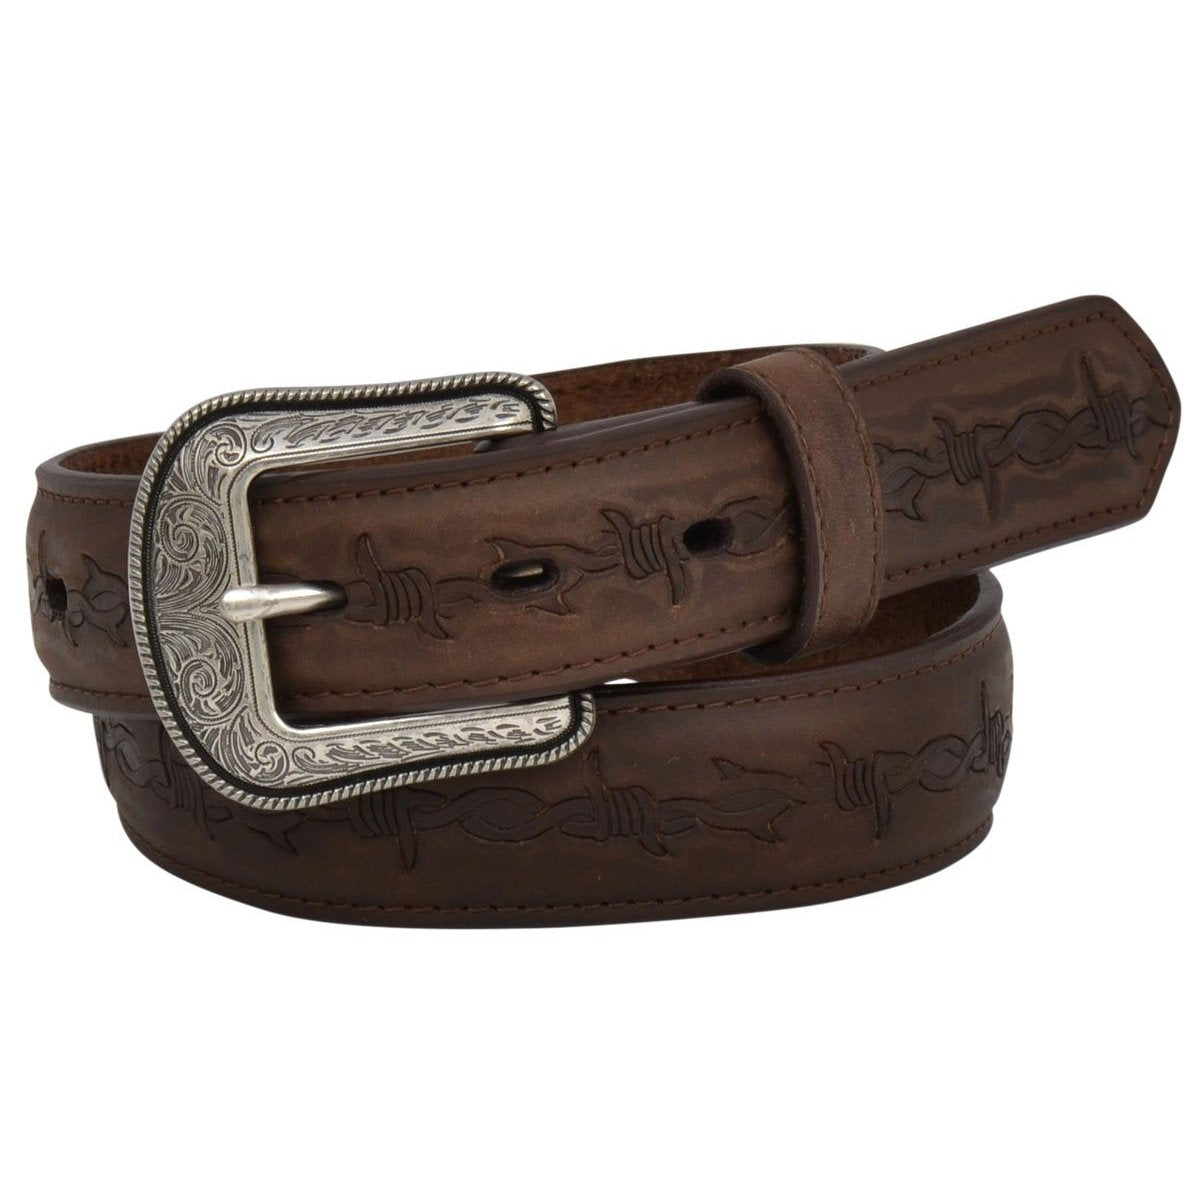 3D Belt Company Toddler Boys' Belt 1 1/4" Crazy Correct Barb Wire - Brown-M & F Western Products-Little Giant Kidz